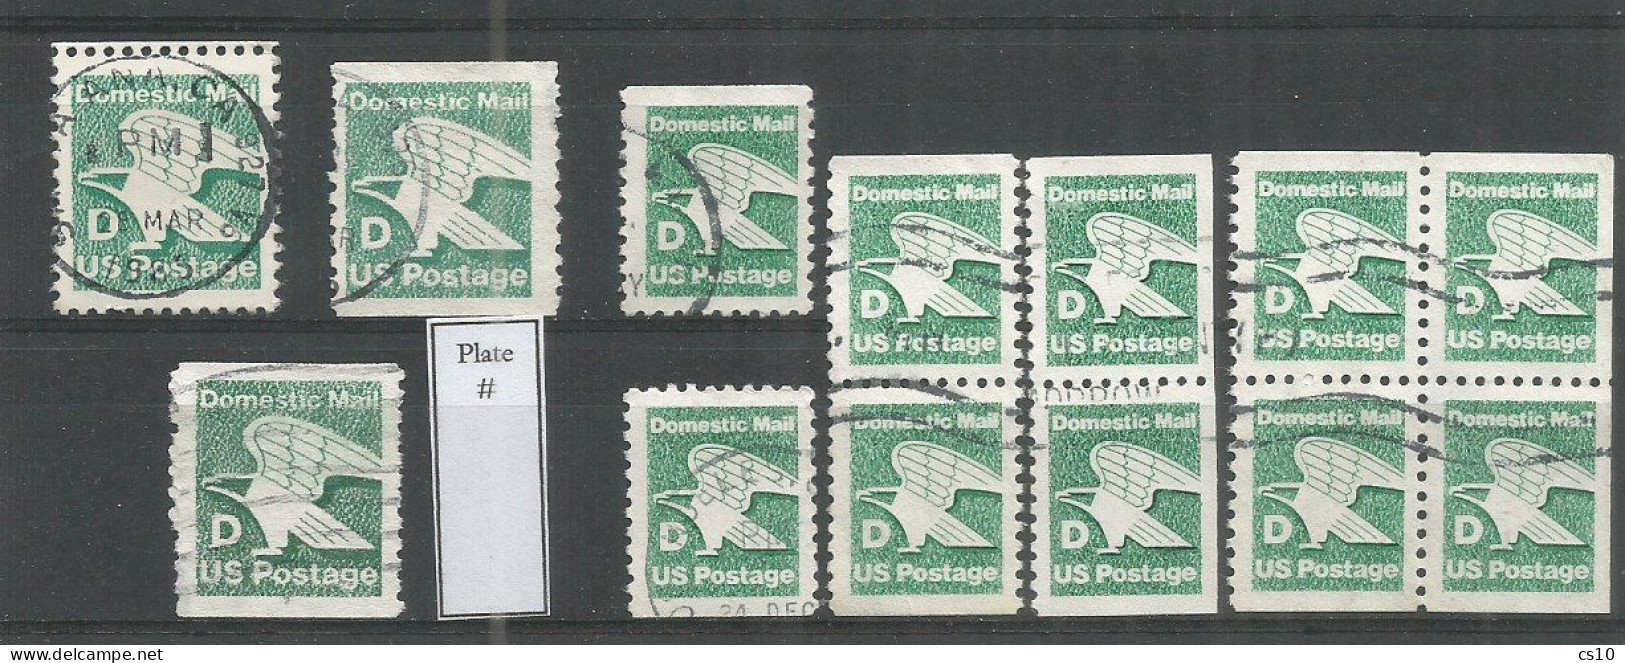 USA 1985 Eagle Domestic Rate "D" SC.#2111/13 Cpl Issue From Sheets + Coil + Plate # + Booklet Pane + Pairs + Singles VFU - Rollenmarken (Plattennummern)